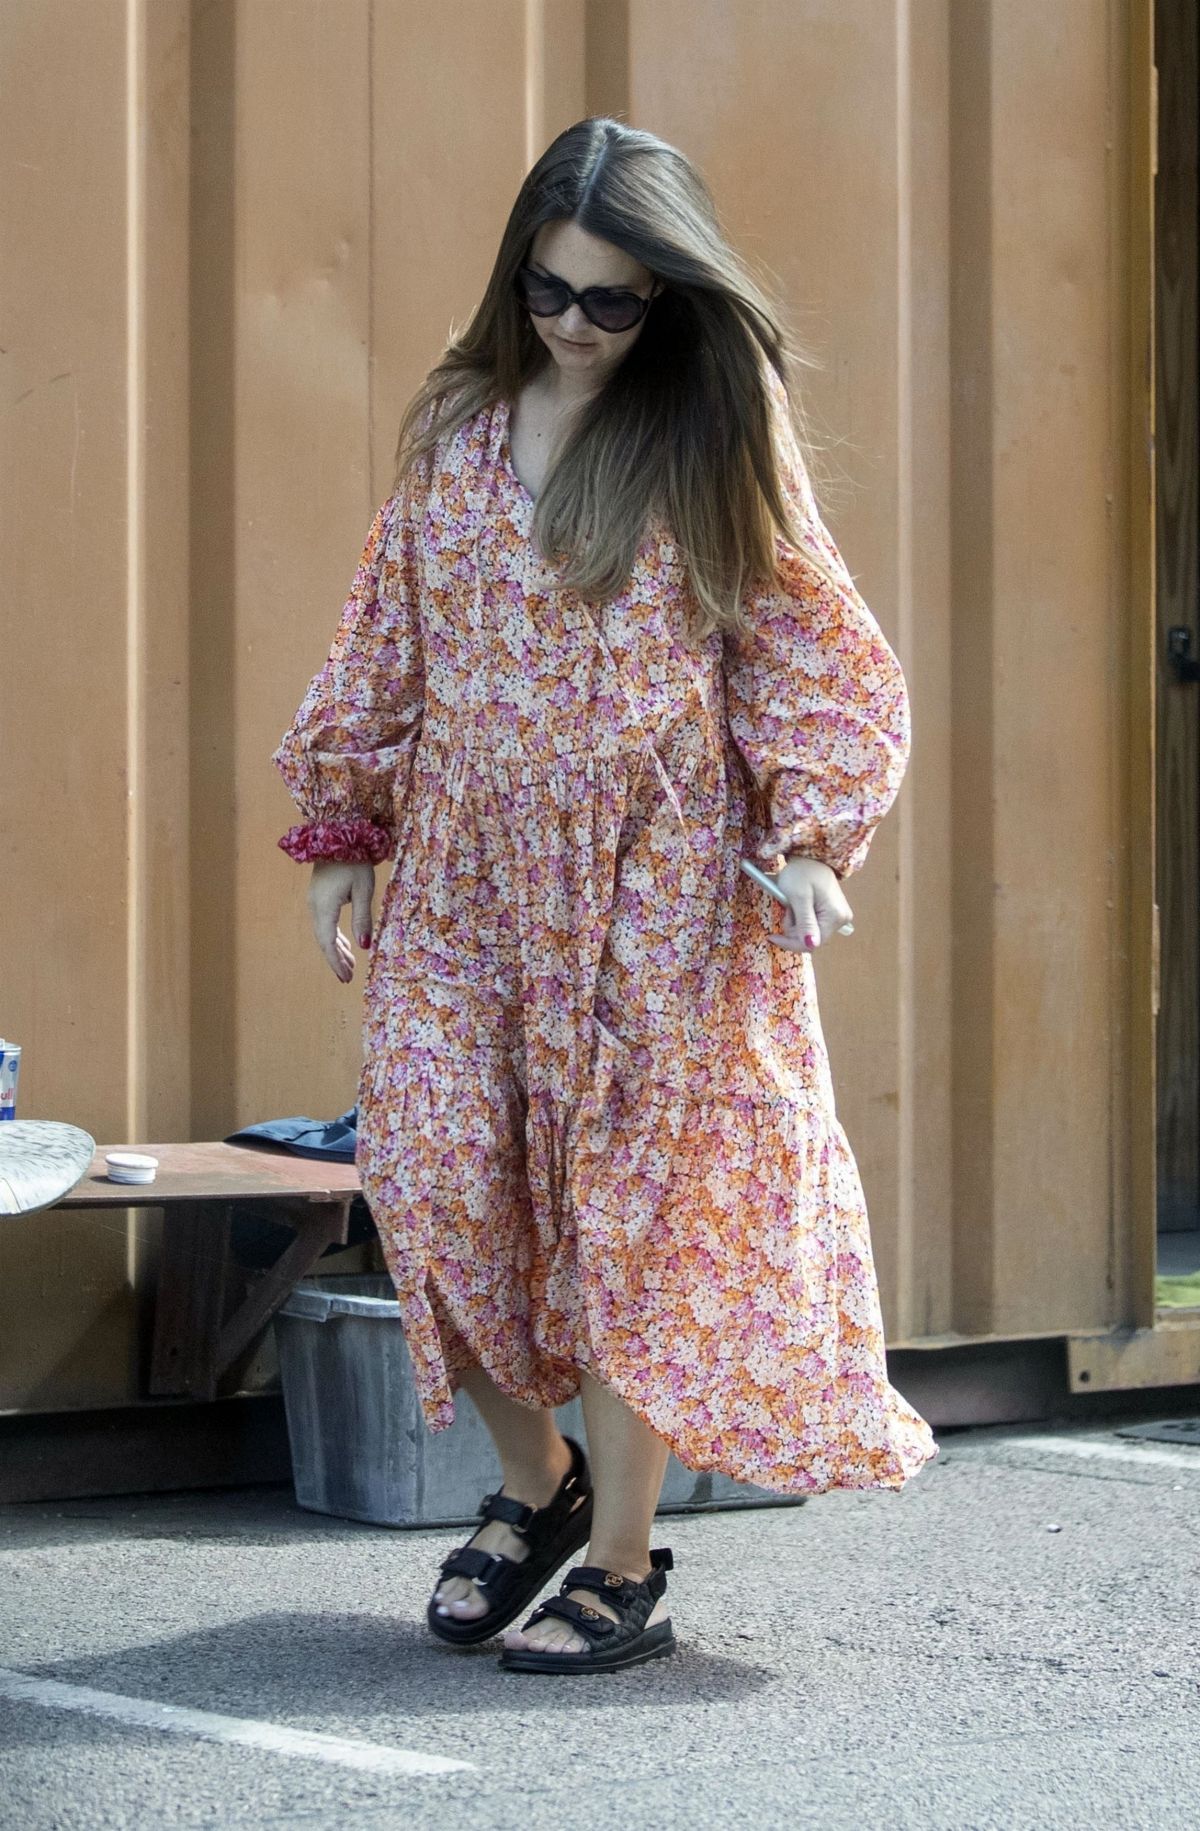 lacey-turner-out-and-about-in-london-08-24-2020-4.jpg